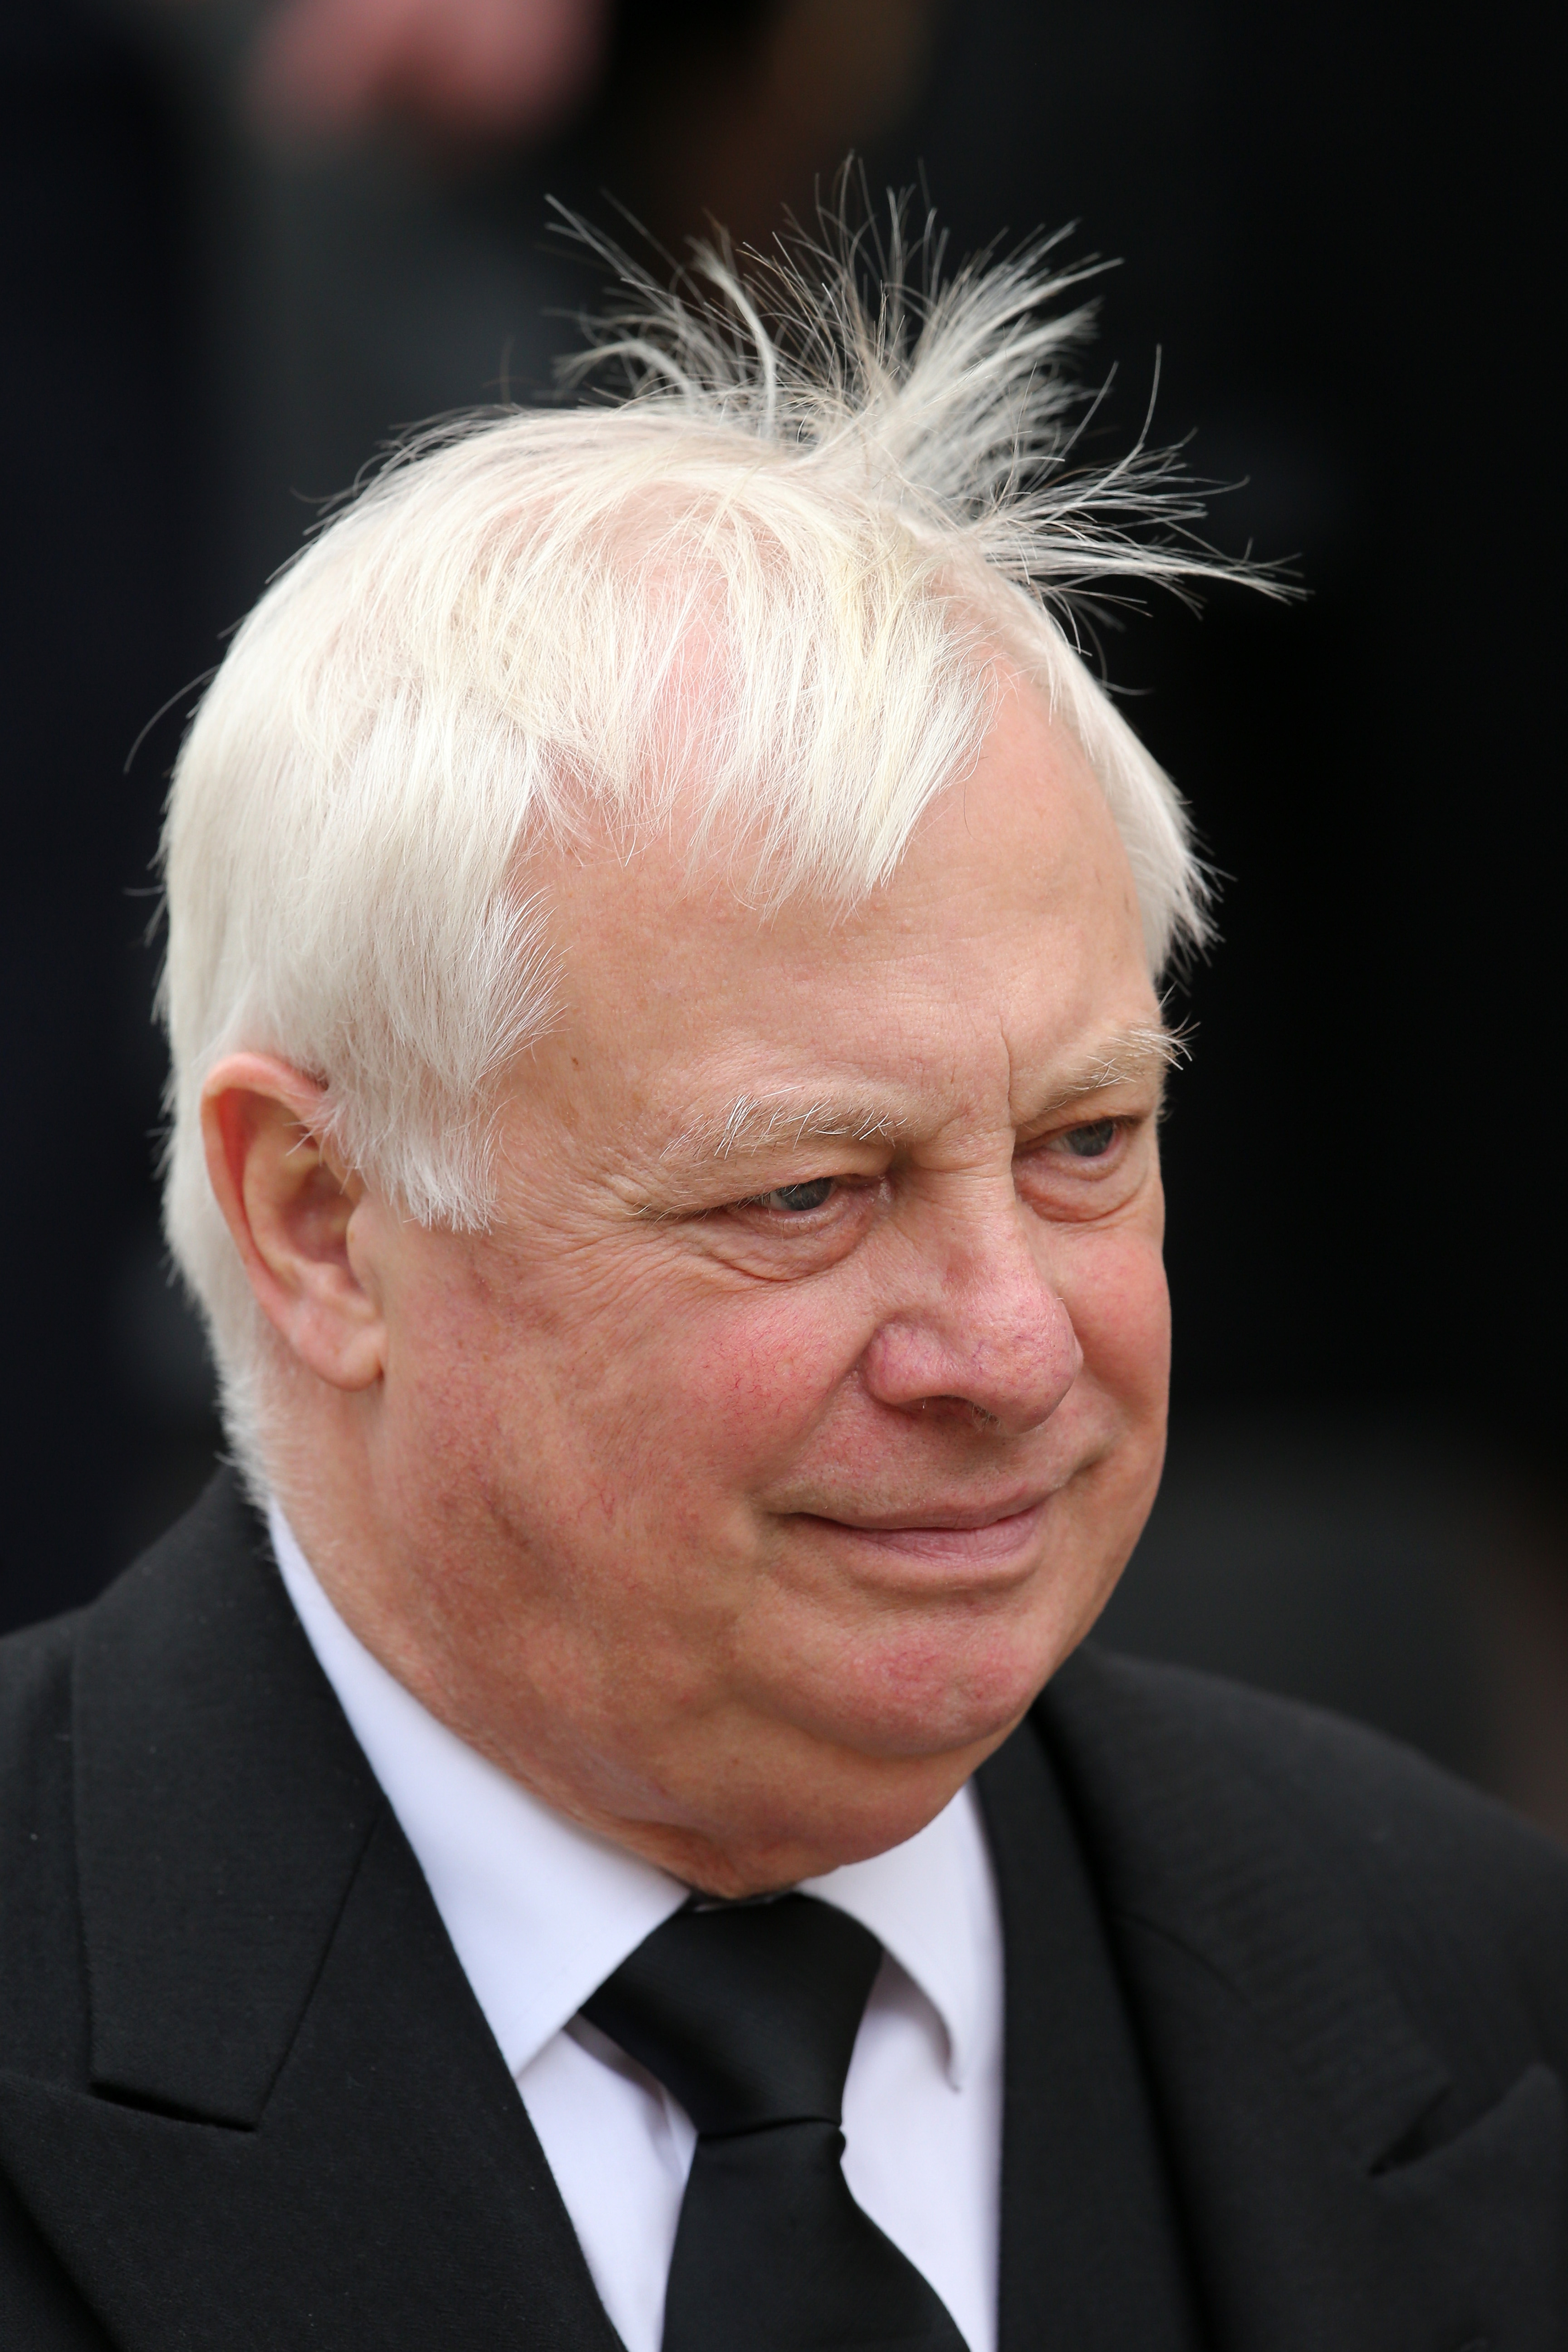 Lord Patten hits out at ‘right-wing English nationalists’ driving Brexit